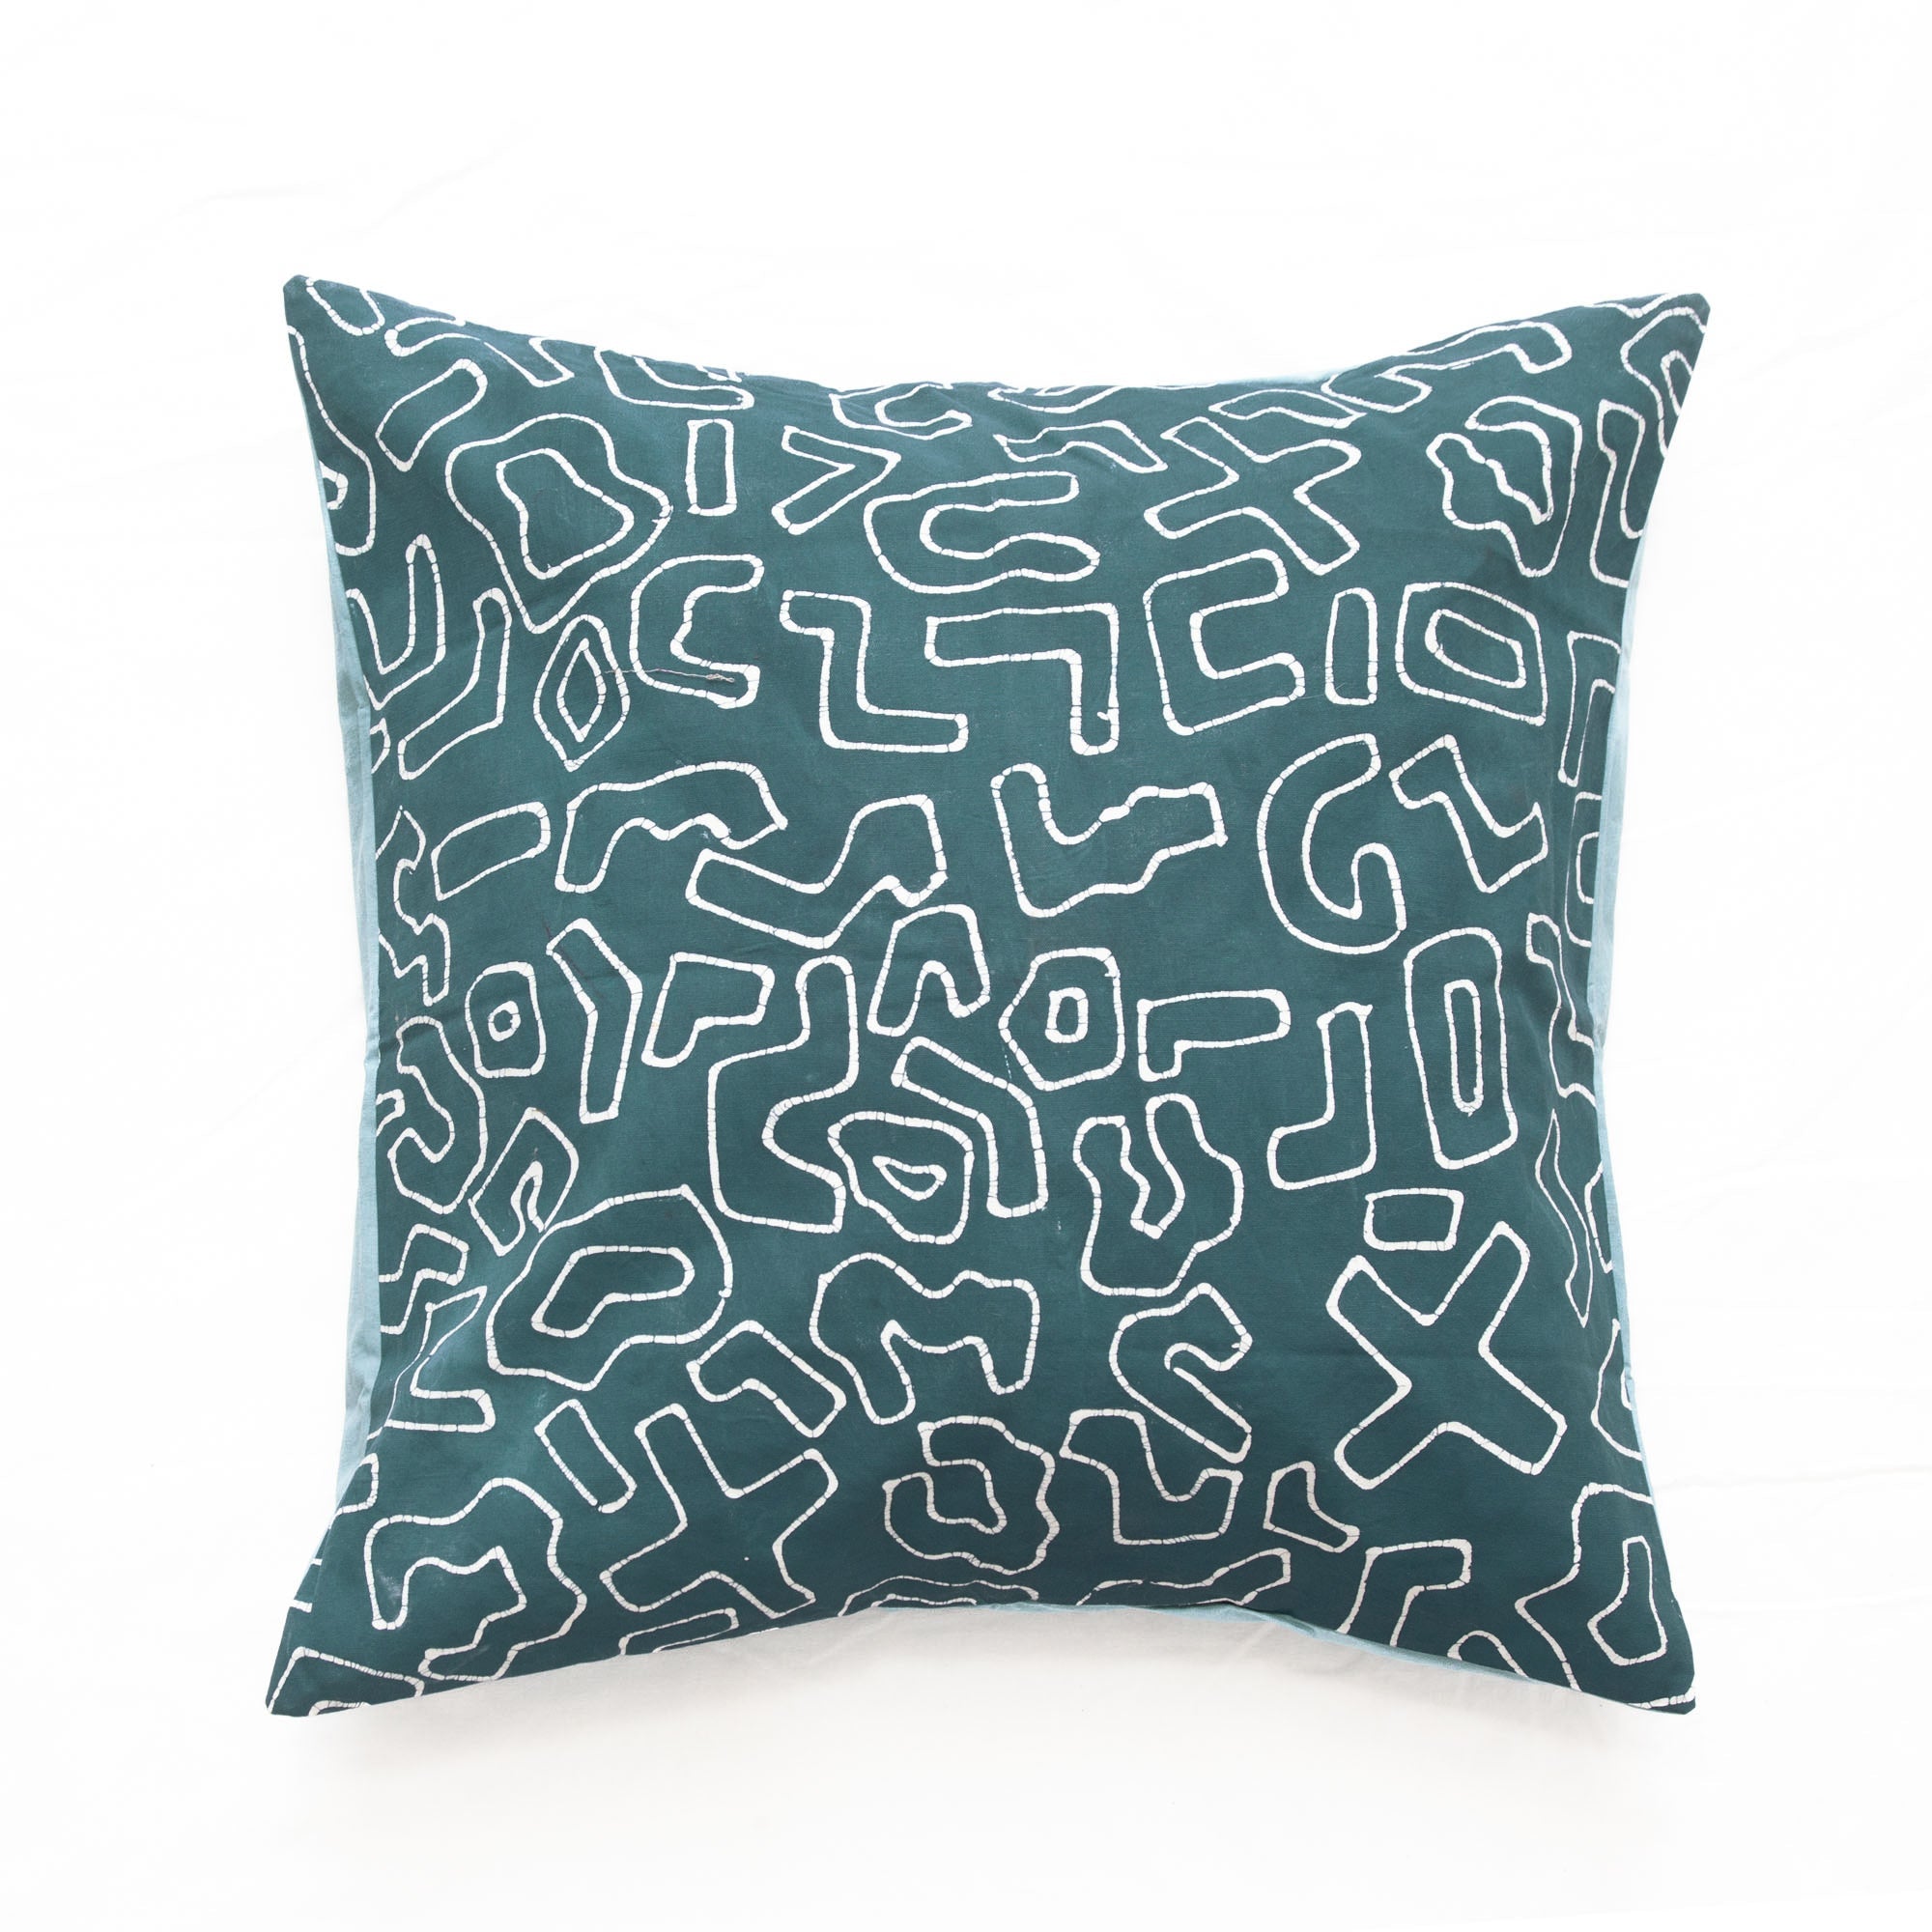 Kuba Blues Outline Teal Cushion Cover - Handmade by TRIBAL TEXTILES - Handcrafted Home Decor Interiors - African Made